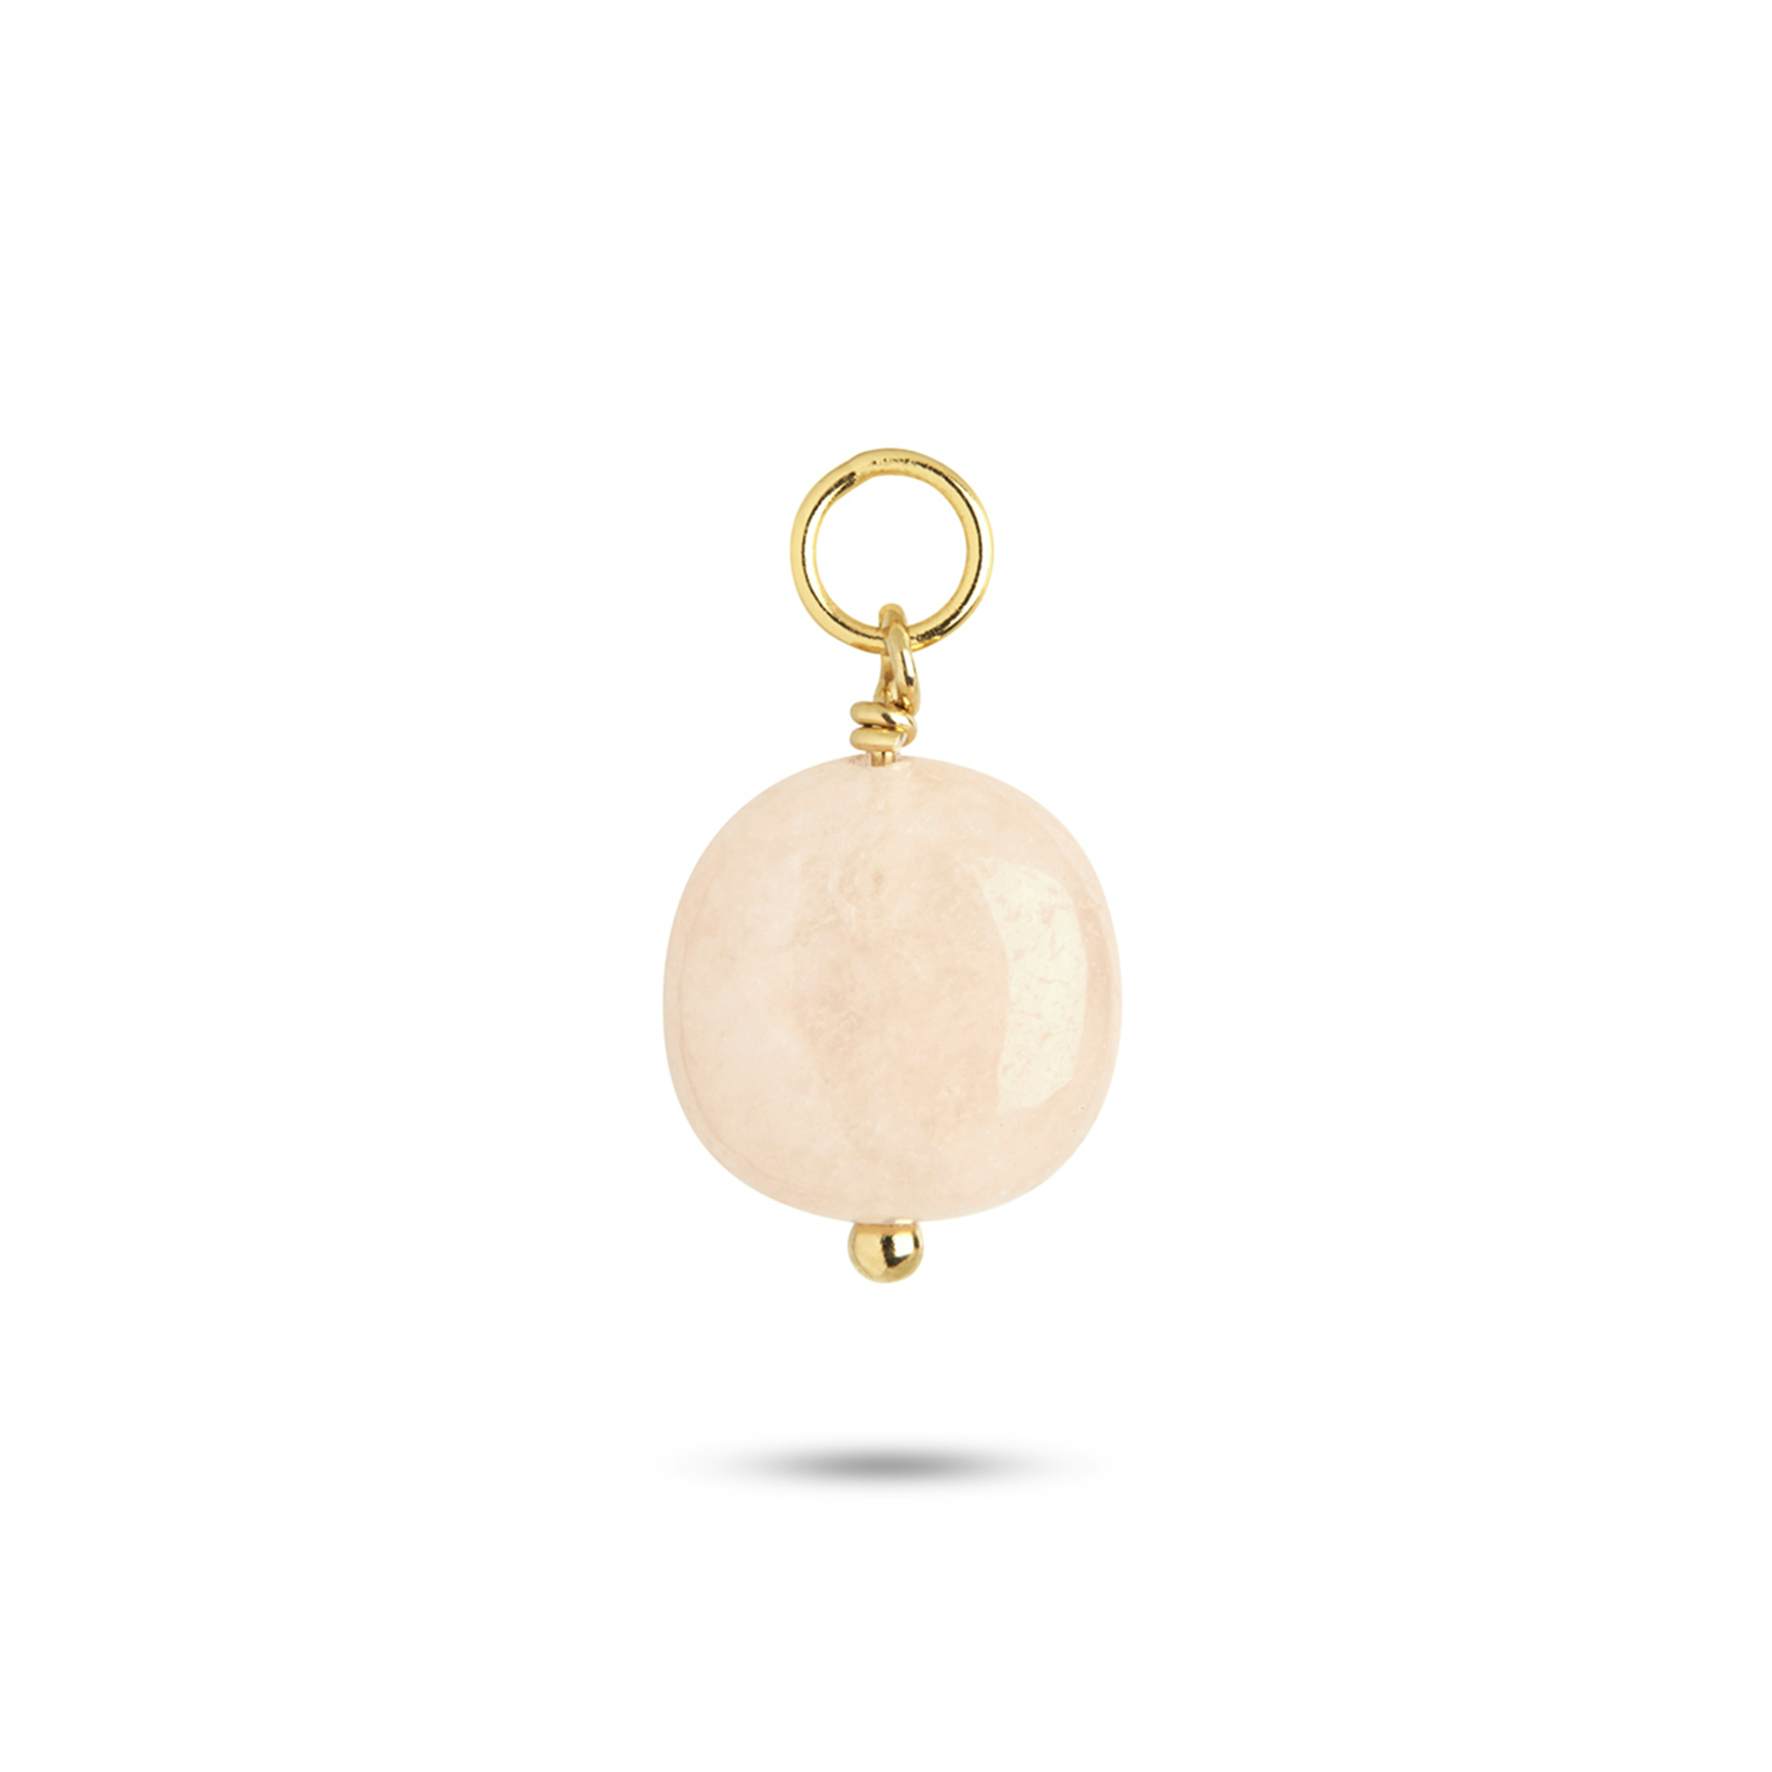 Archieve Pendant Valentine from Carré in Goldplated-Silver Sterling 925